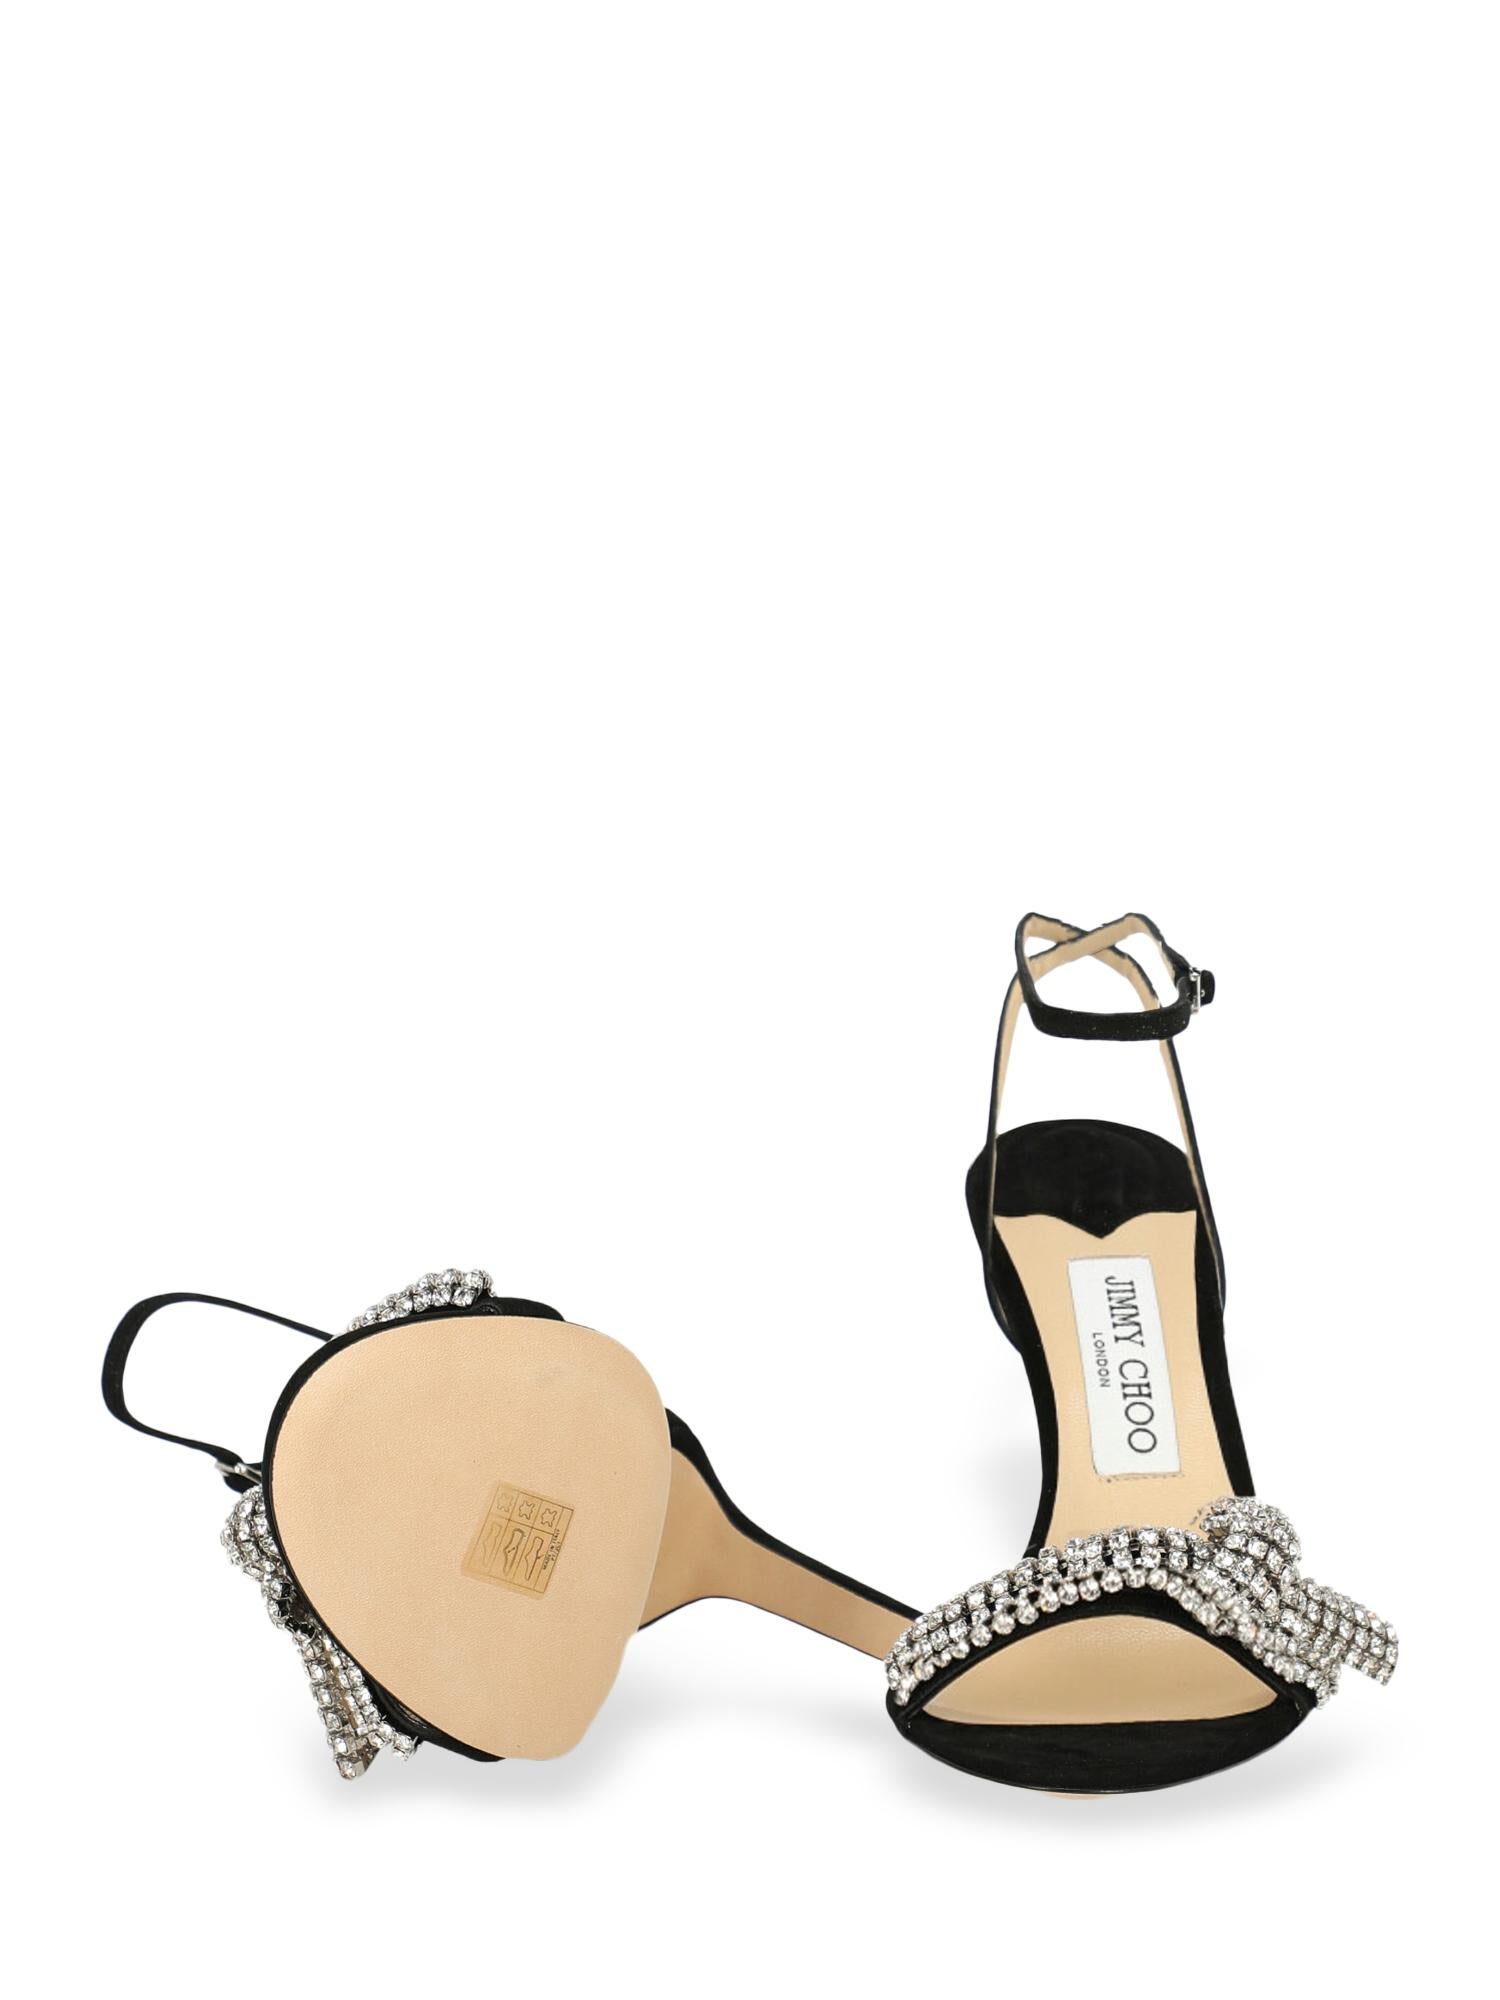 Jimmy Choo Woman Sandals Black Leather IT 40 For Sale 1